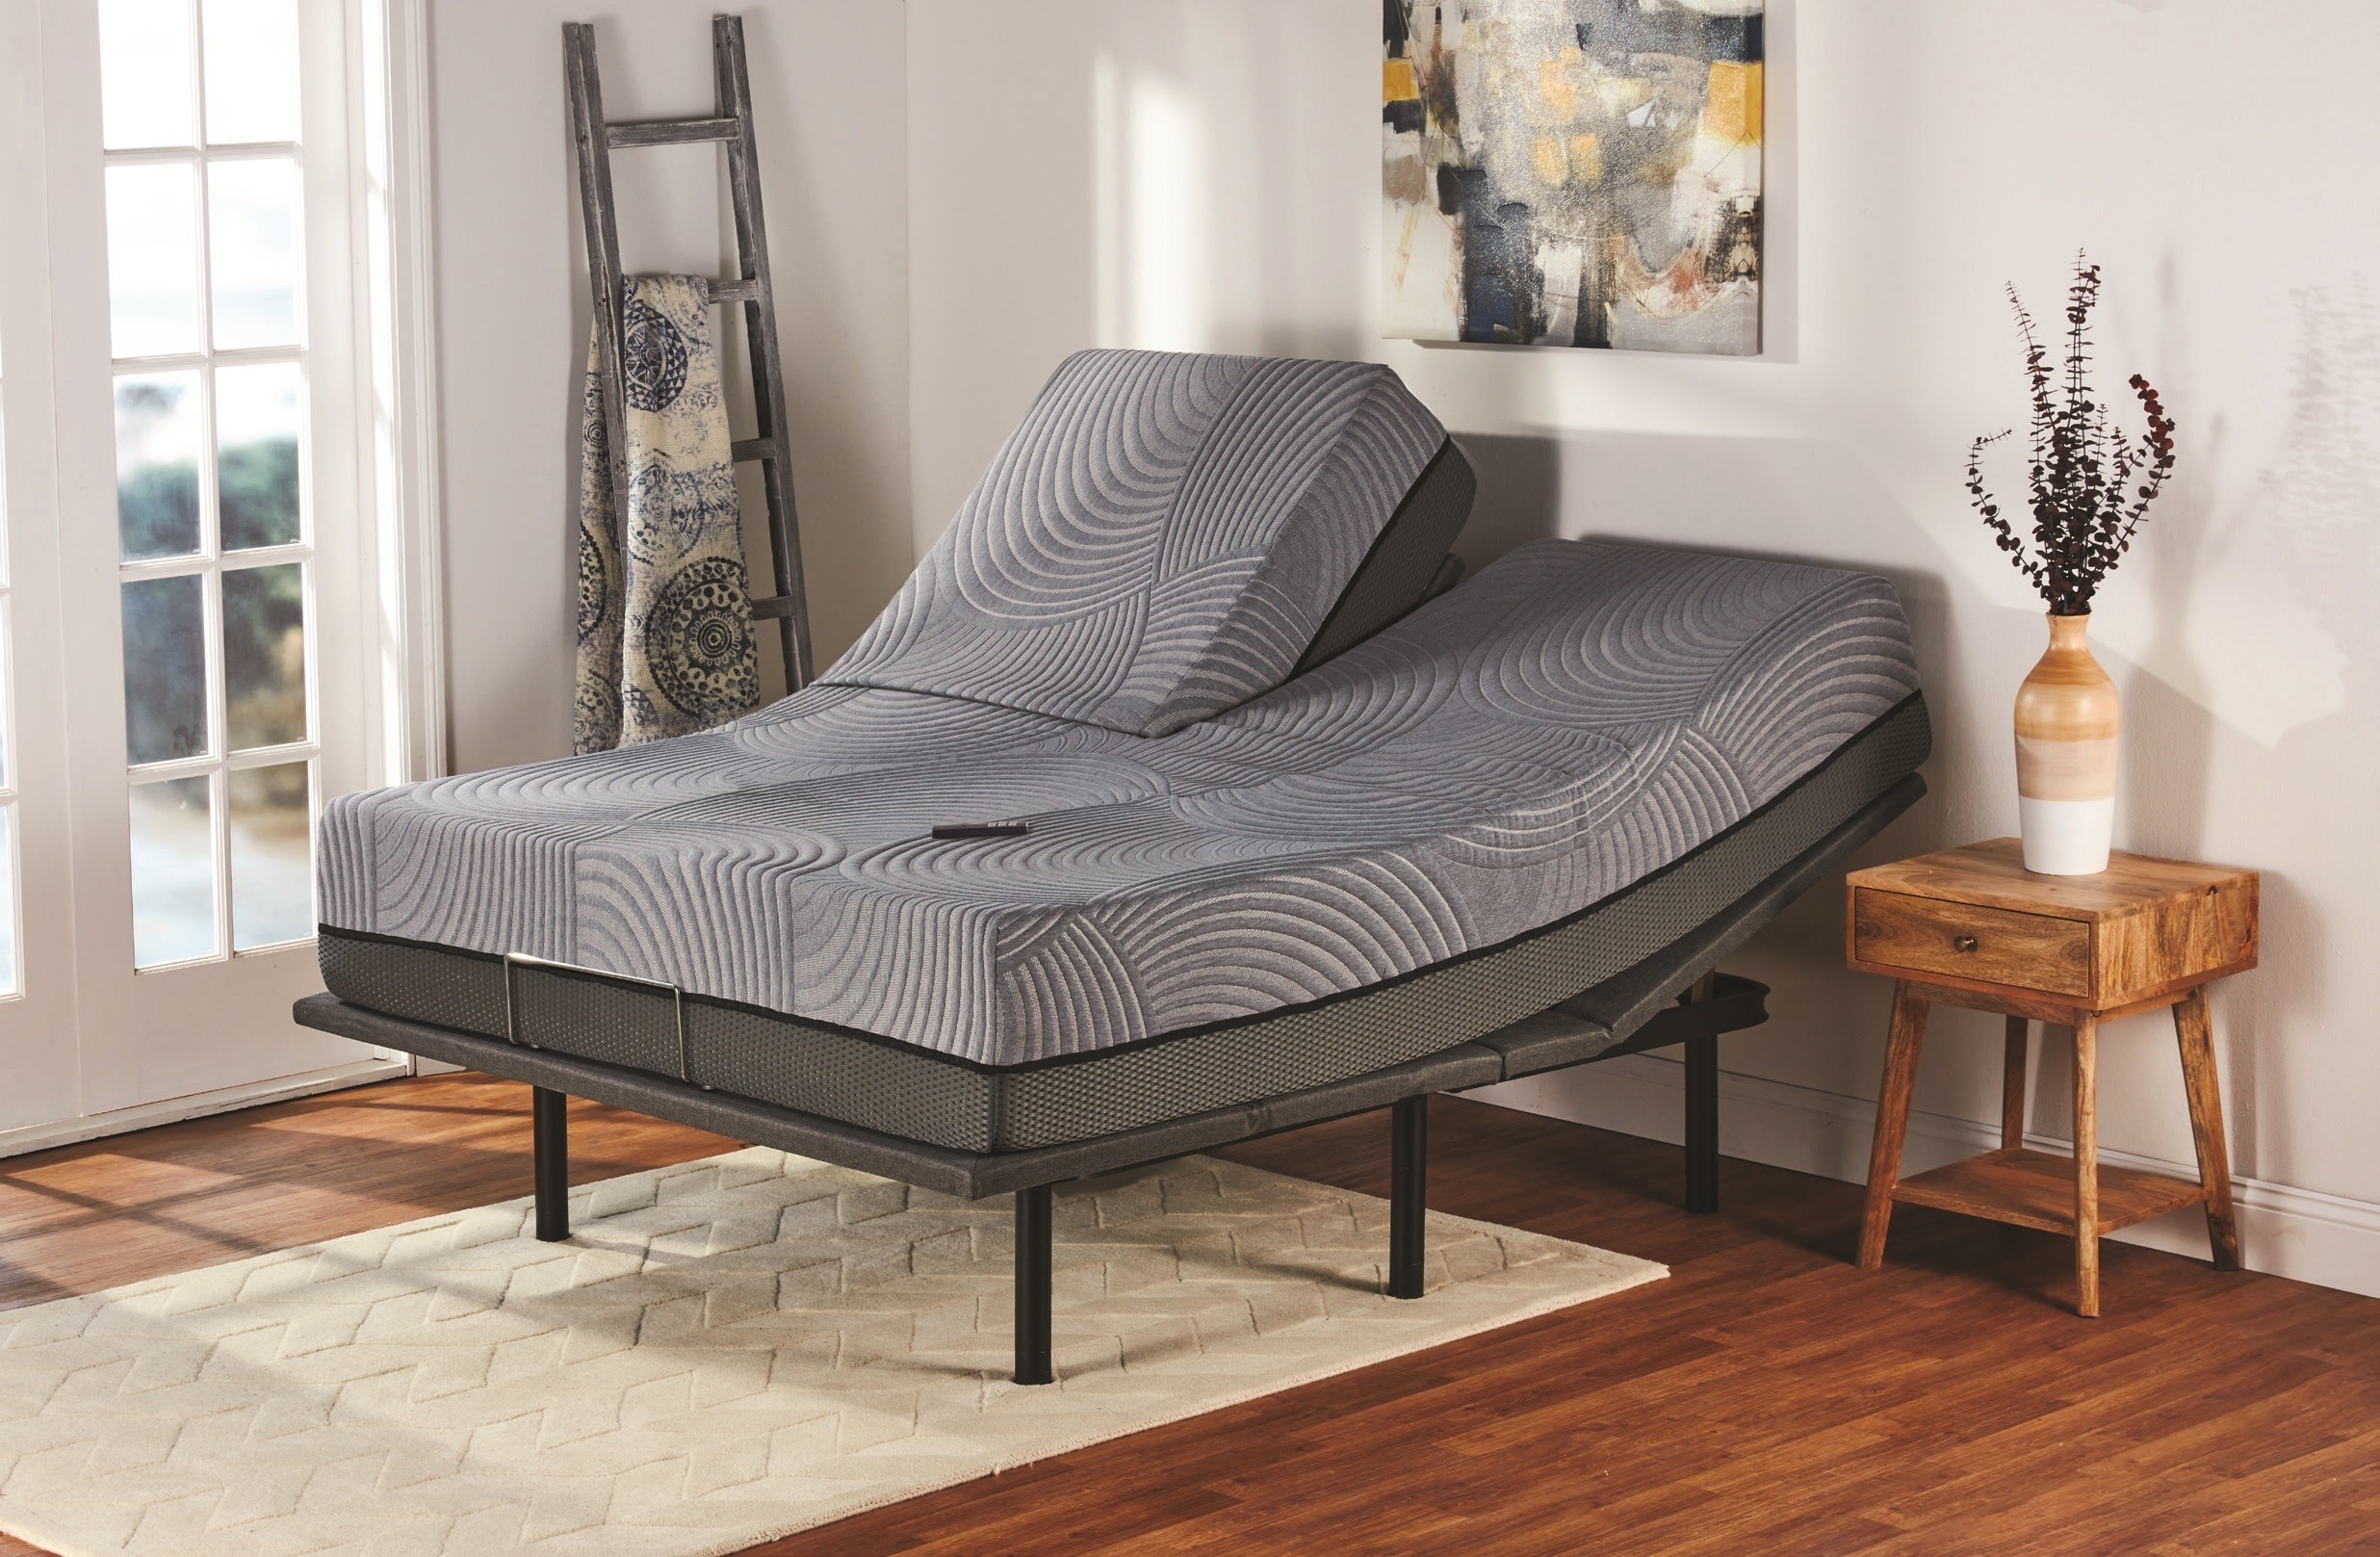 queen adjustable beds with split mattress and control